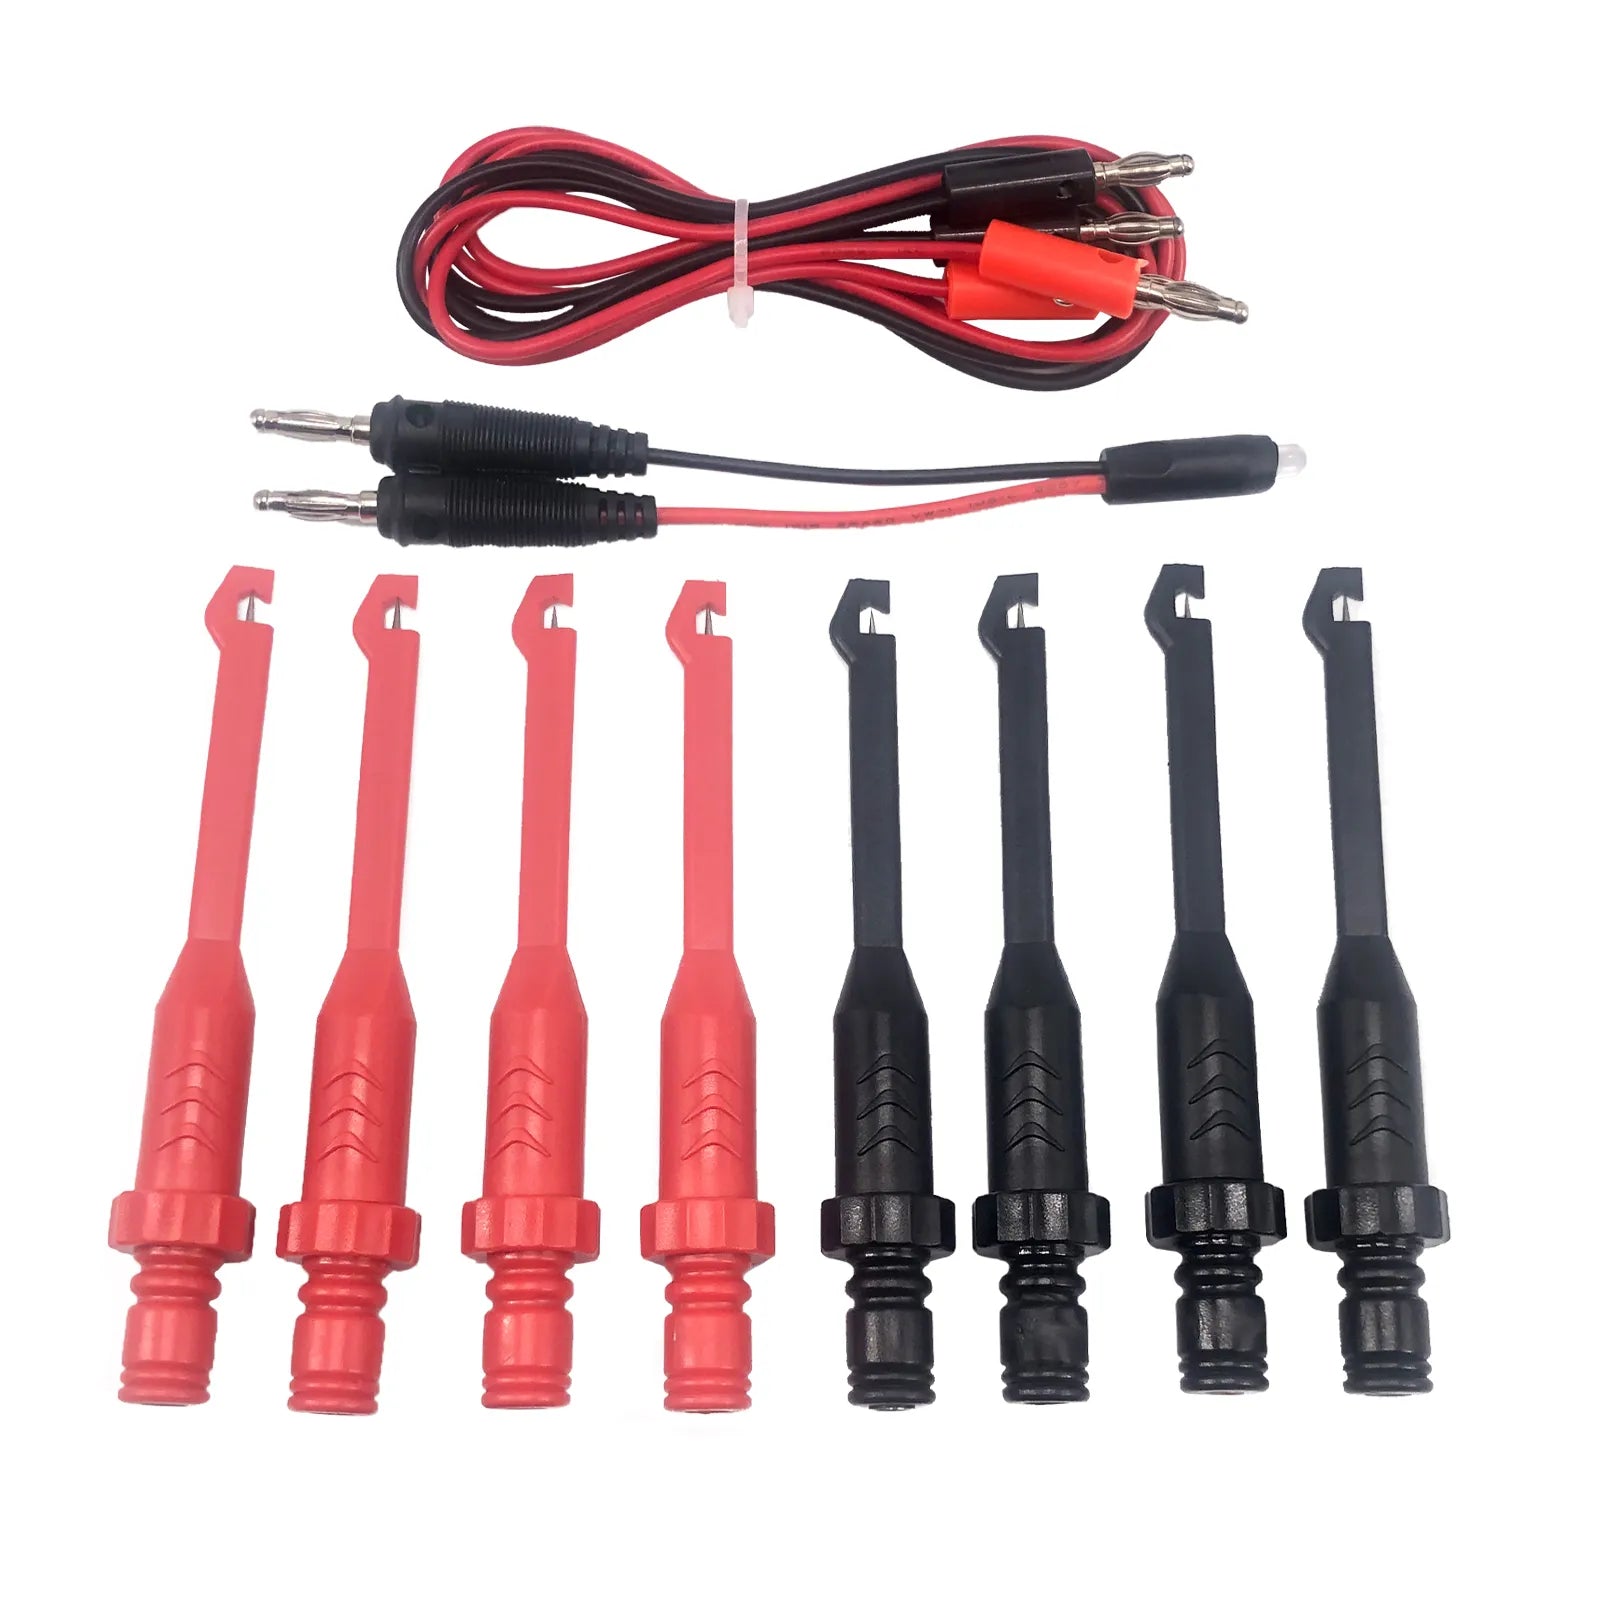 Power Probe Automotive test Clip Cable Clips Piercing Test Clip with 4mm Banana seat puncture probe test clip